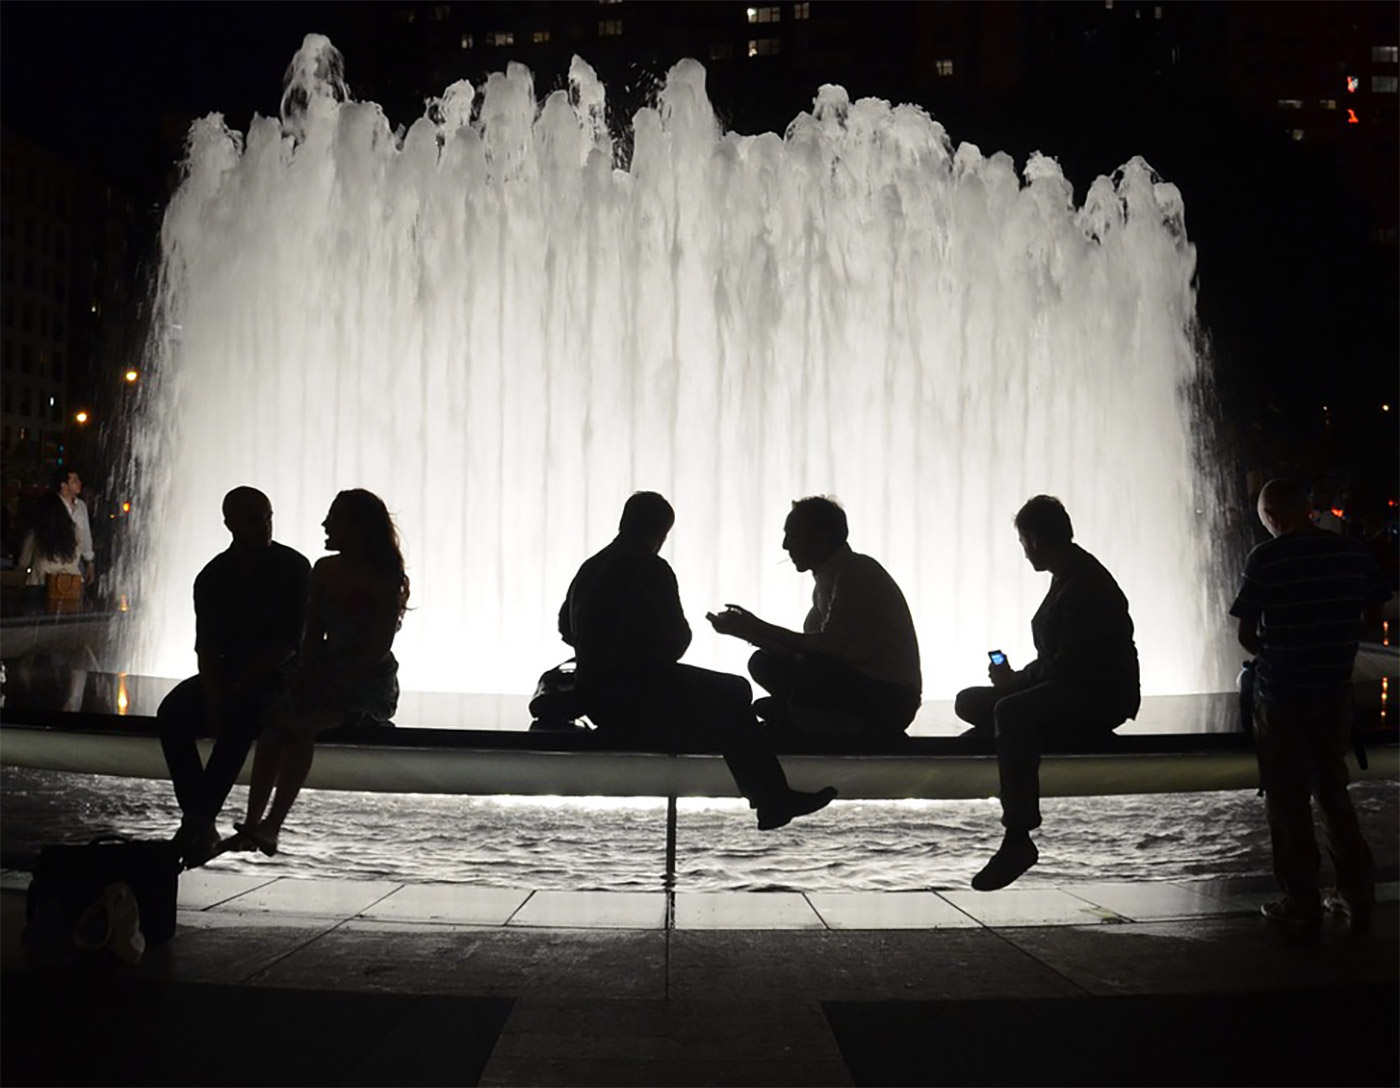 People talking in front of a fountain